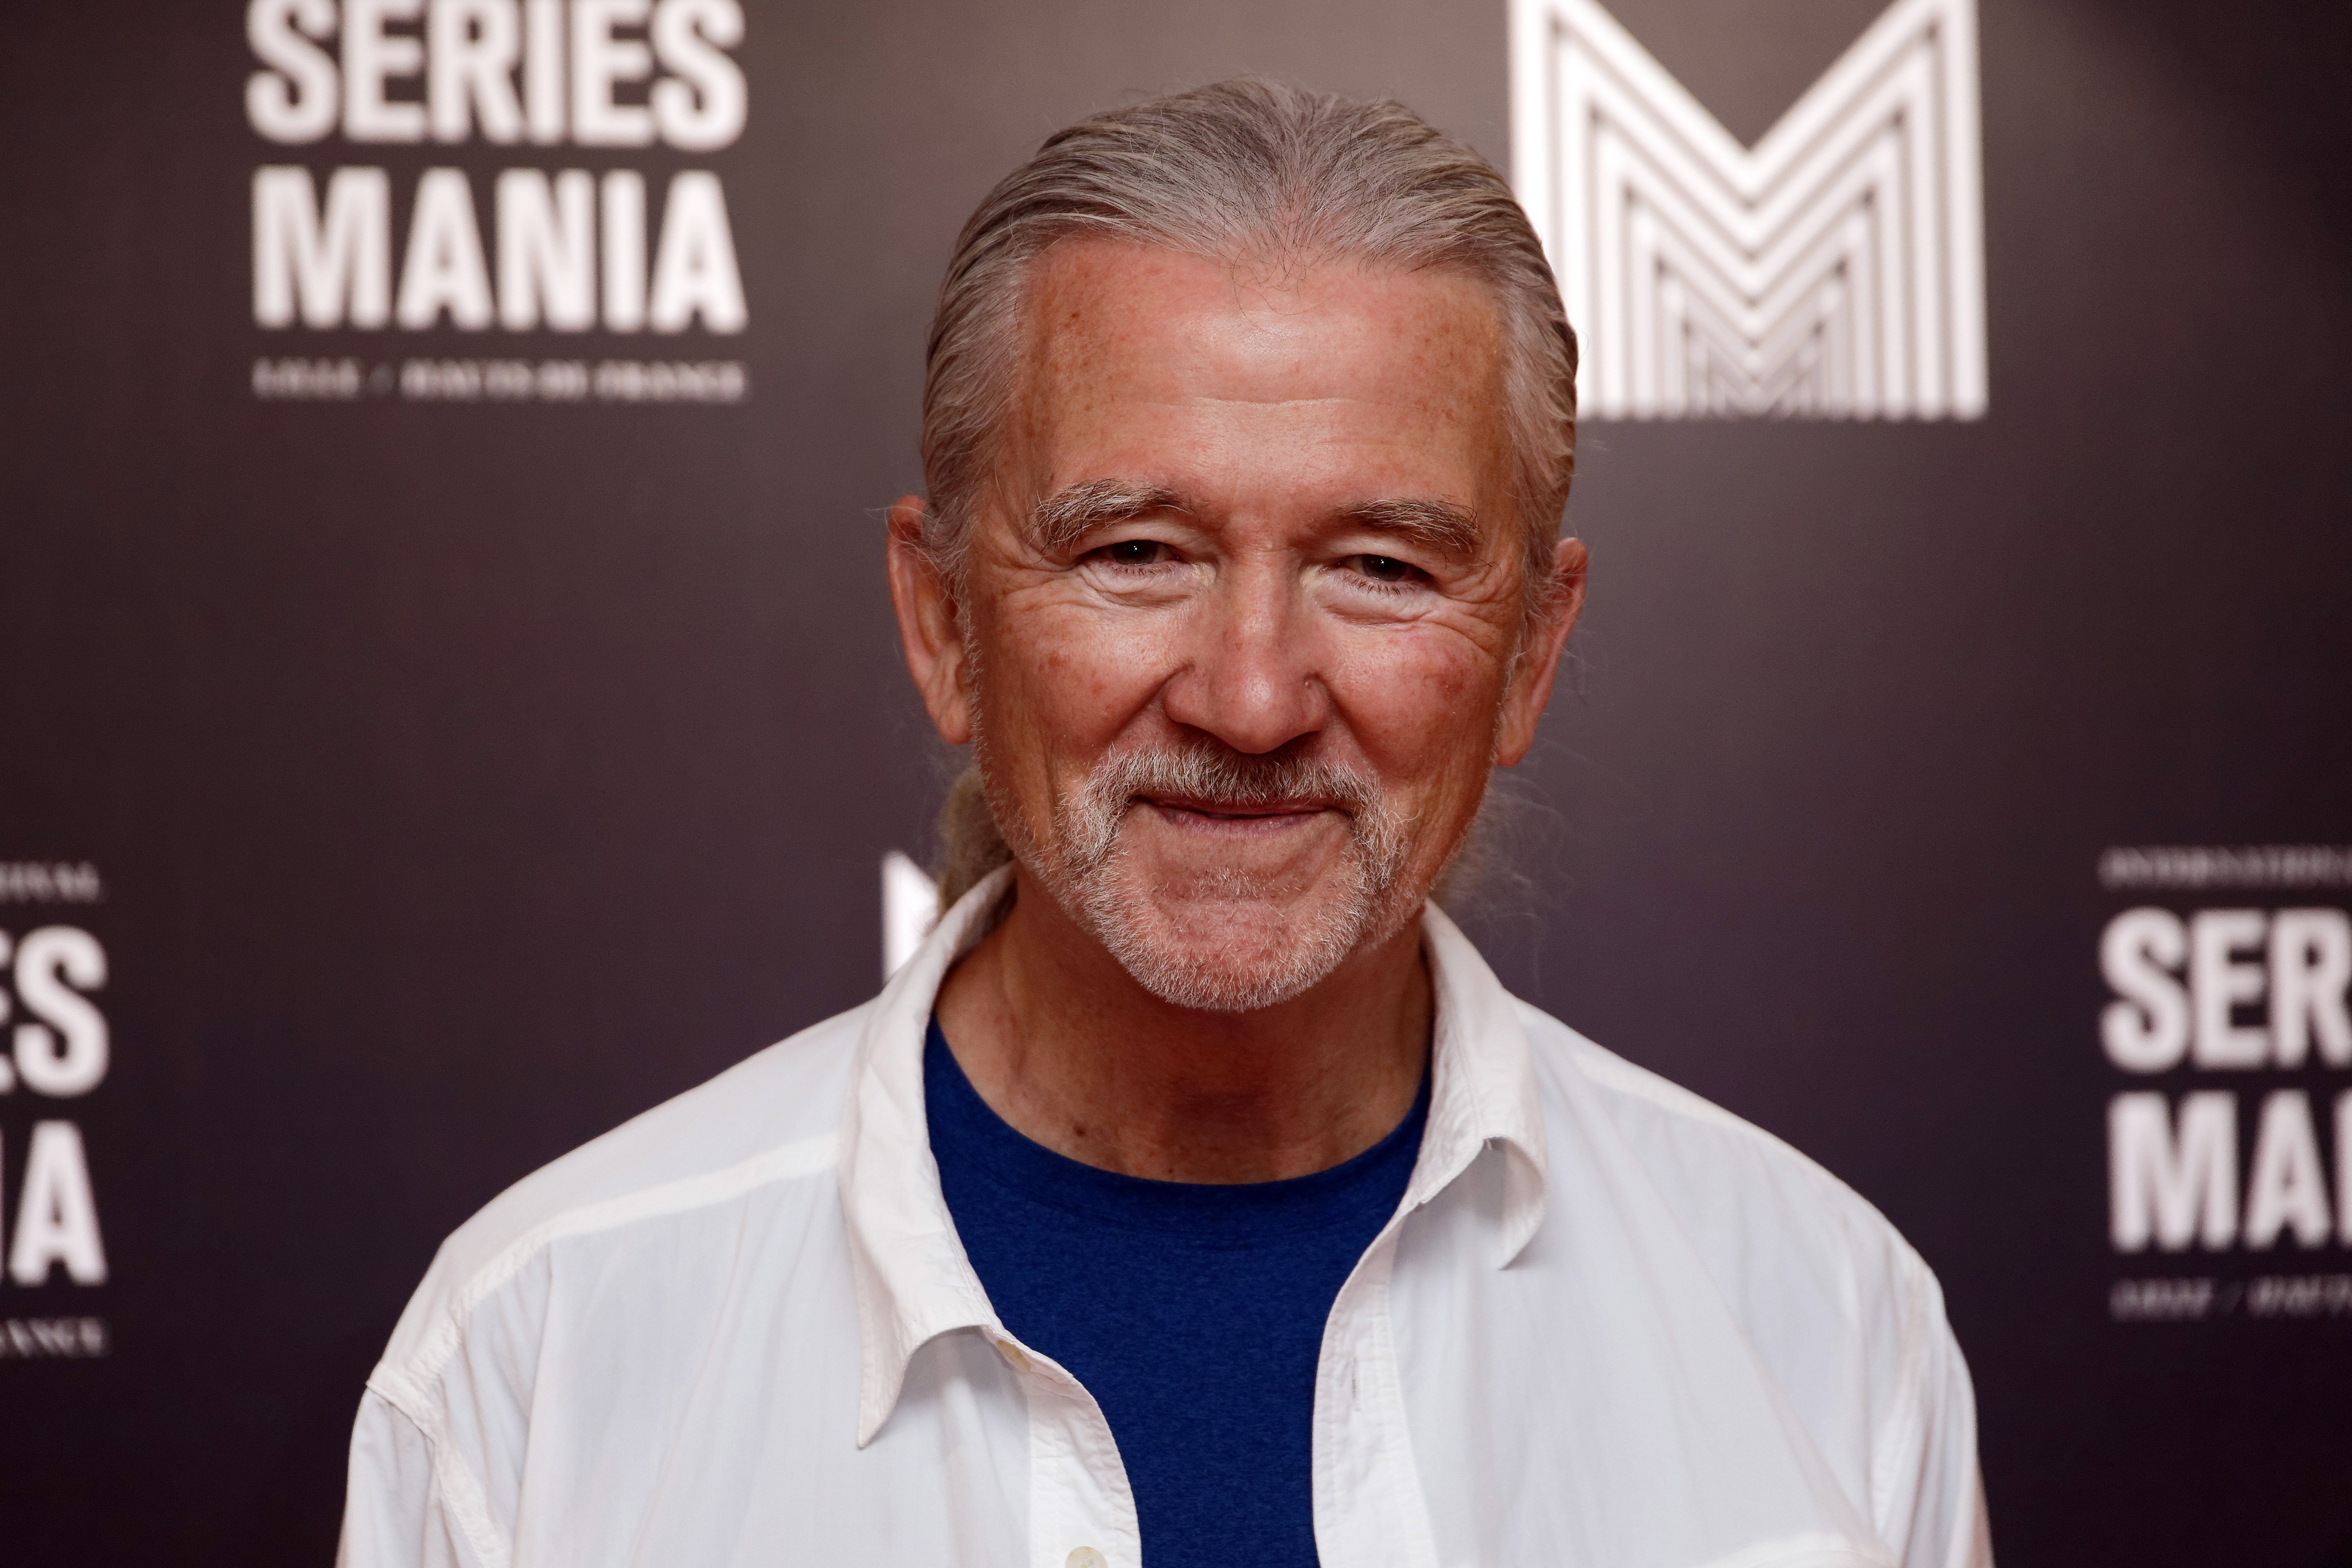 Patrick Duffy during the Series Mania Lille Hauts de France festival day 6 photocall on May 2, 2018 in Lille, France. | Photo: Getty Images